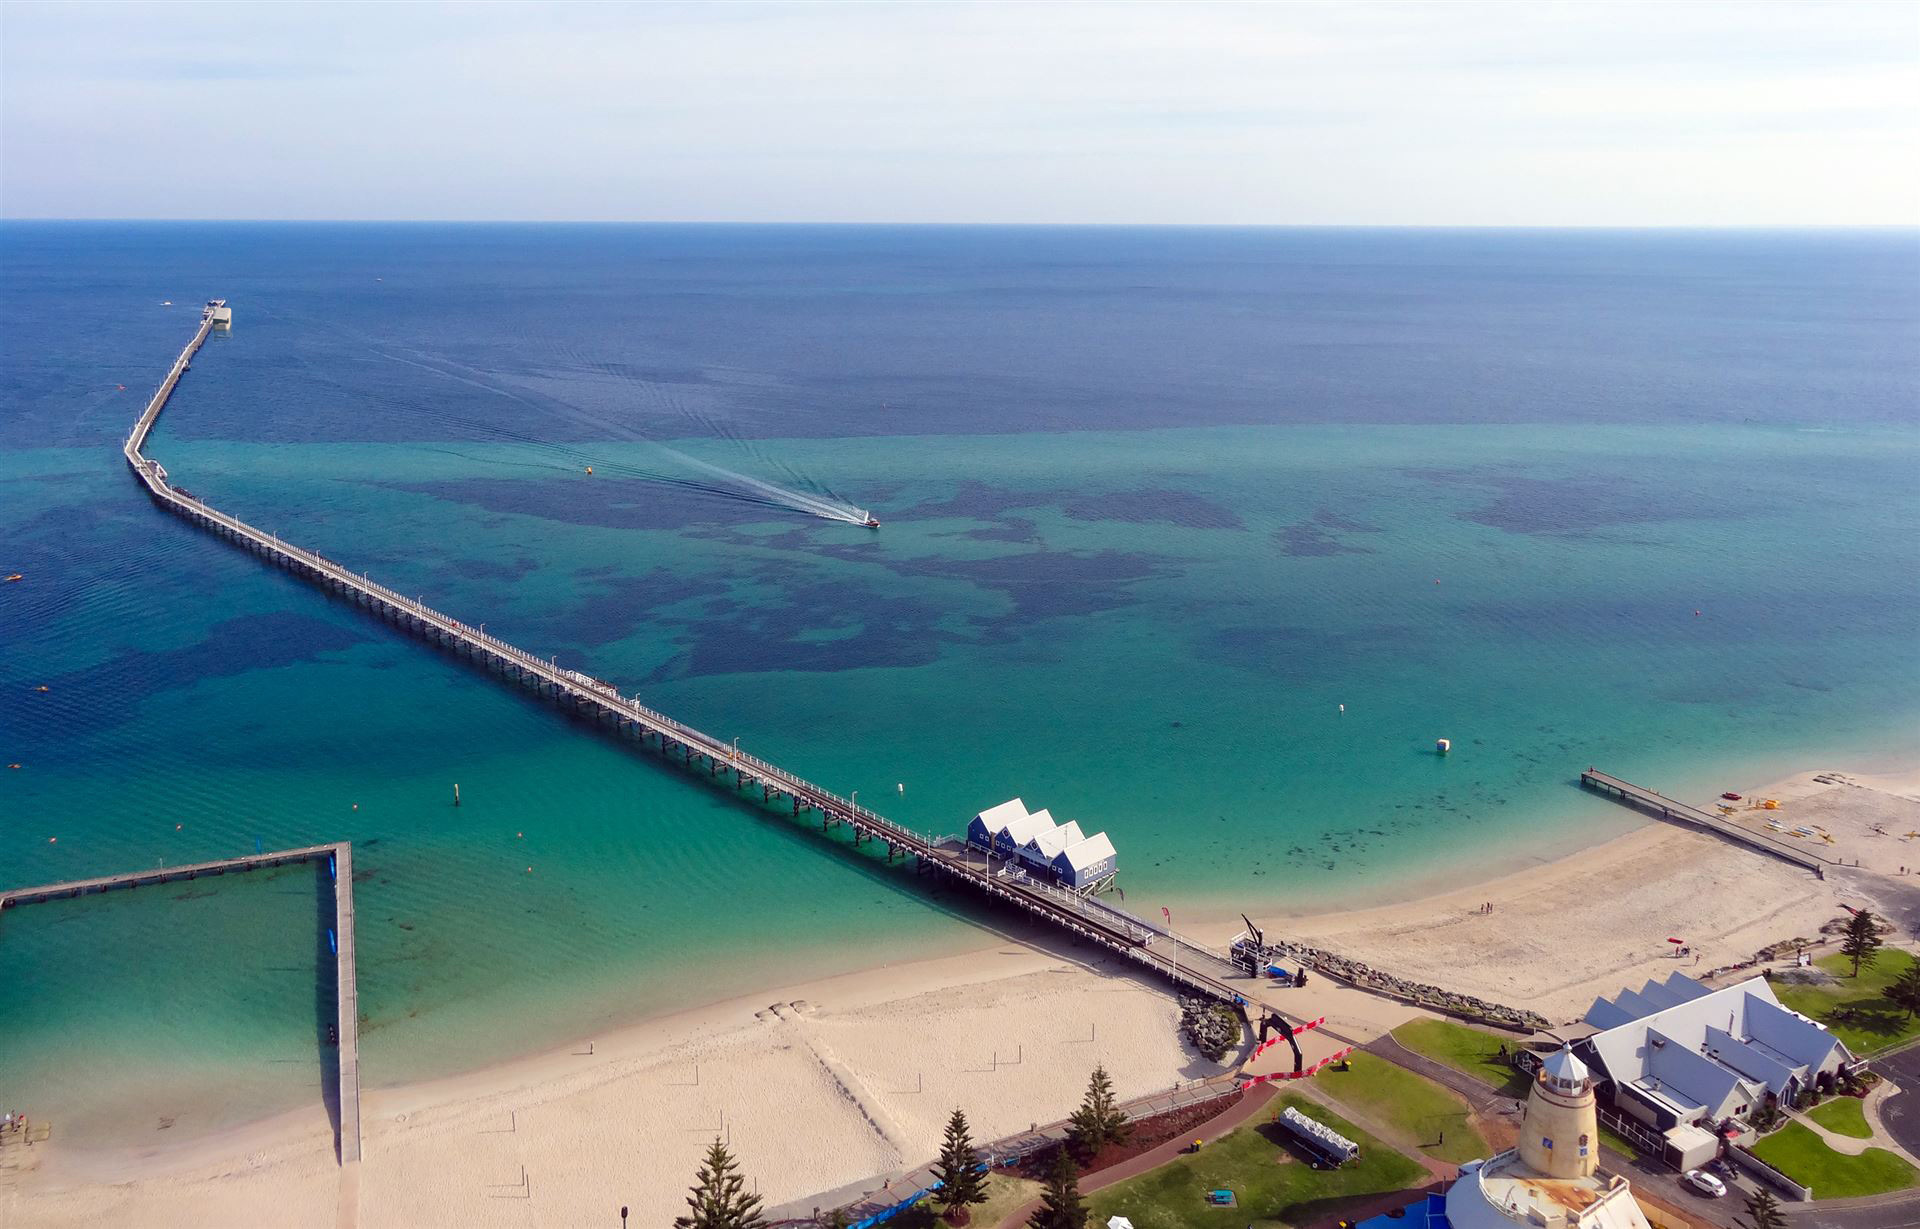 Aerial view looking down the Busselton Jetty and towards the AUDC